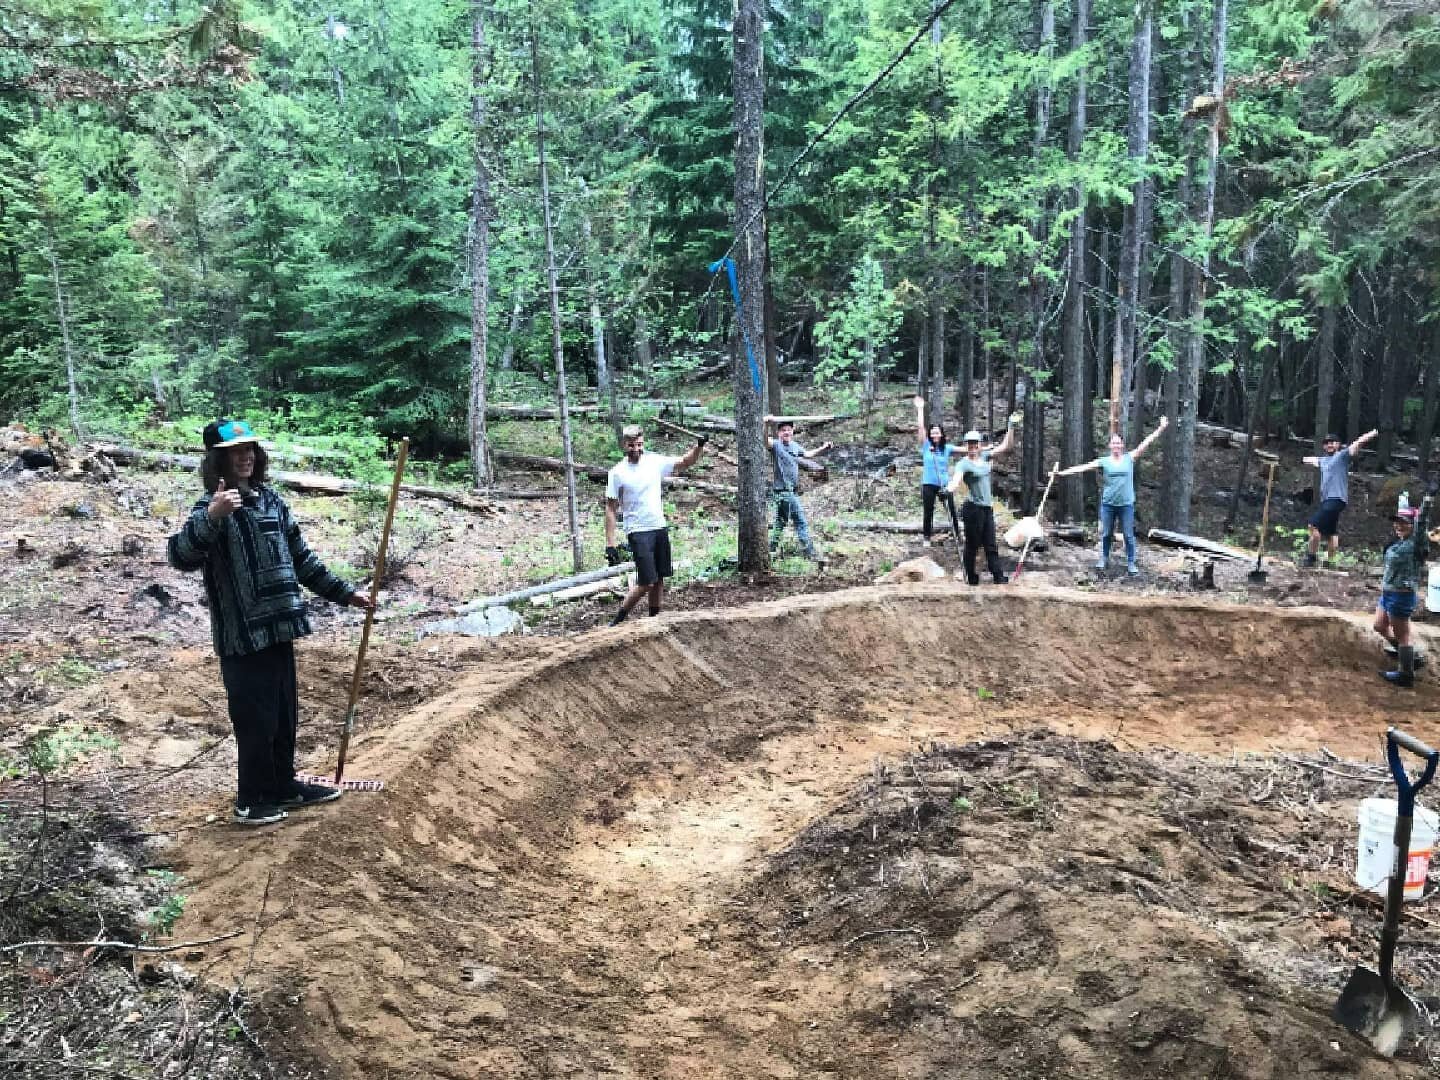 TRAIL KARMA! The 2nd Volunteer Trail night was a great success! We had a good turnout and moved a lot of dirt on the reshaping of one of the corners on Short Svoboda. Thanks everyone who came out and braved the forecast and made this happen. Was an a